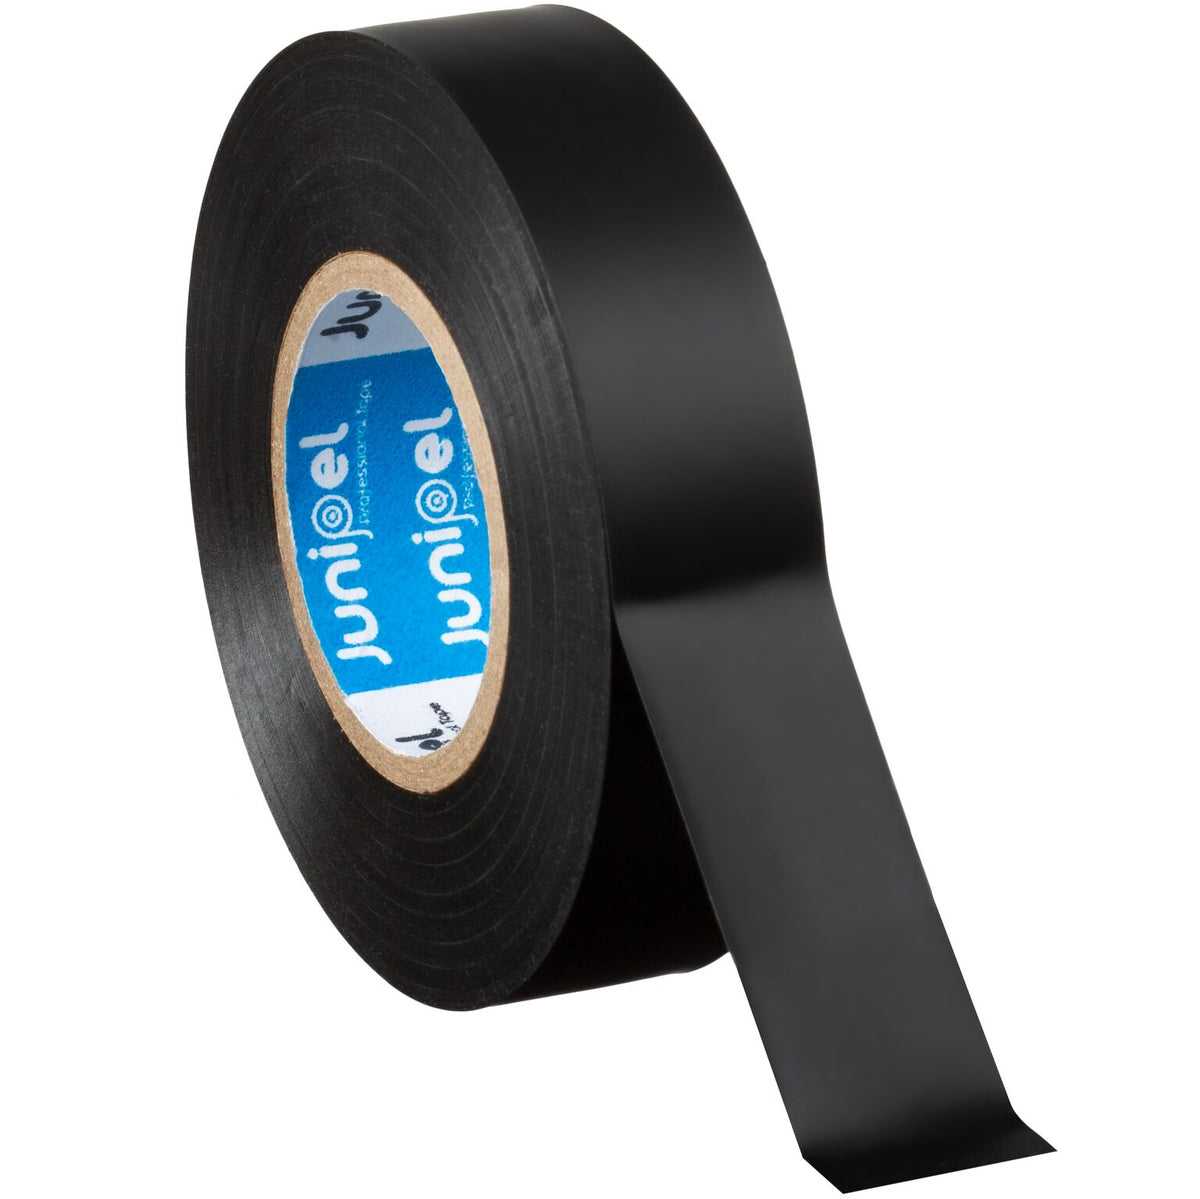 T.R.U. EL-766AW Pink General Purpose Electrical Tape 3/4 Width x 66'  Length UL/CSA listed core. Utility Vinyl Electrical Tape (10 Rolls).